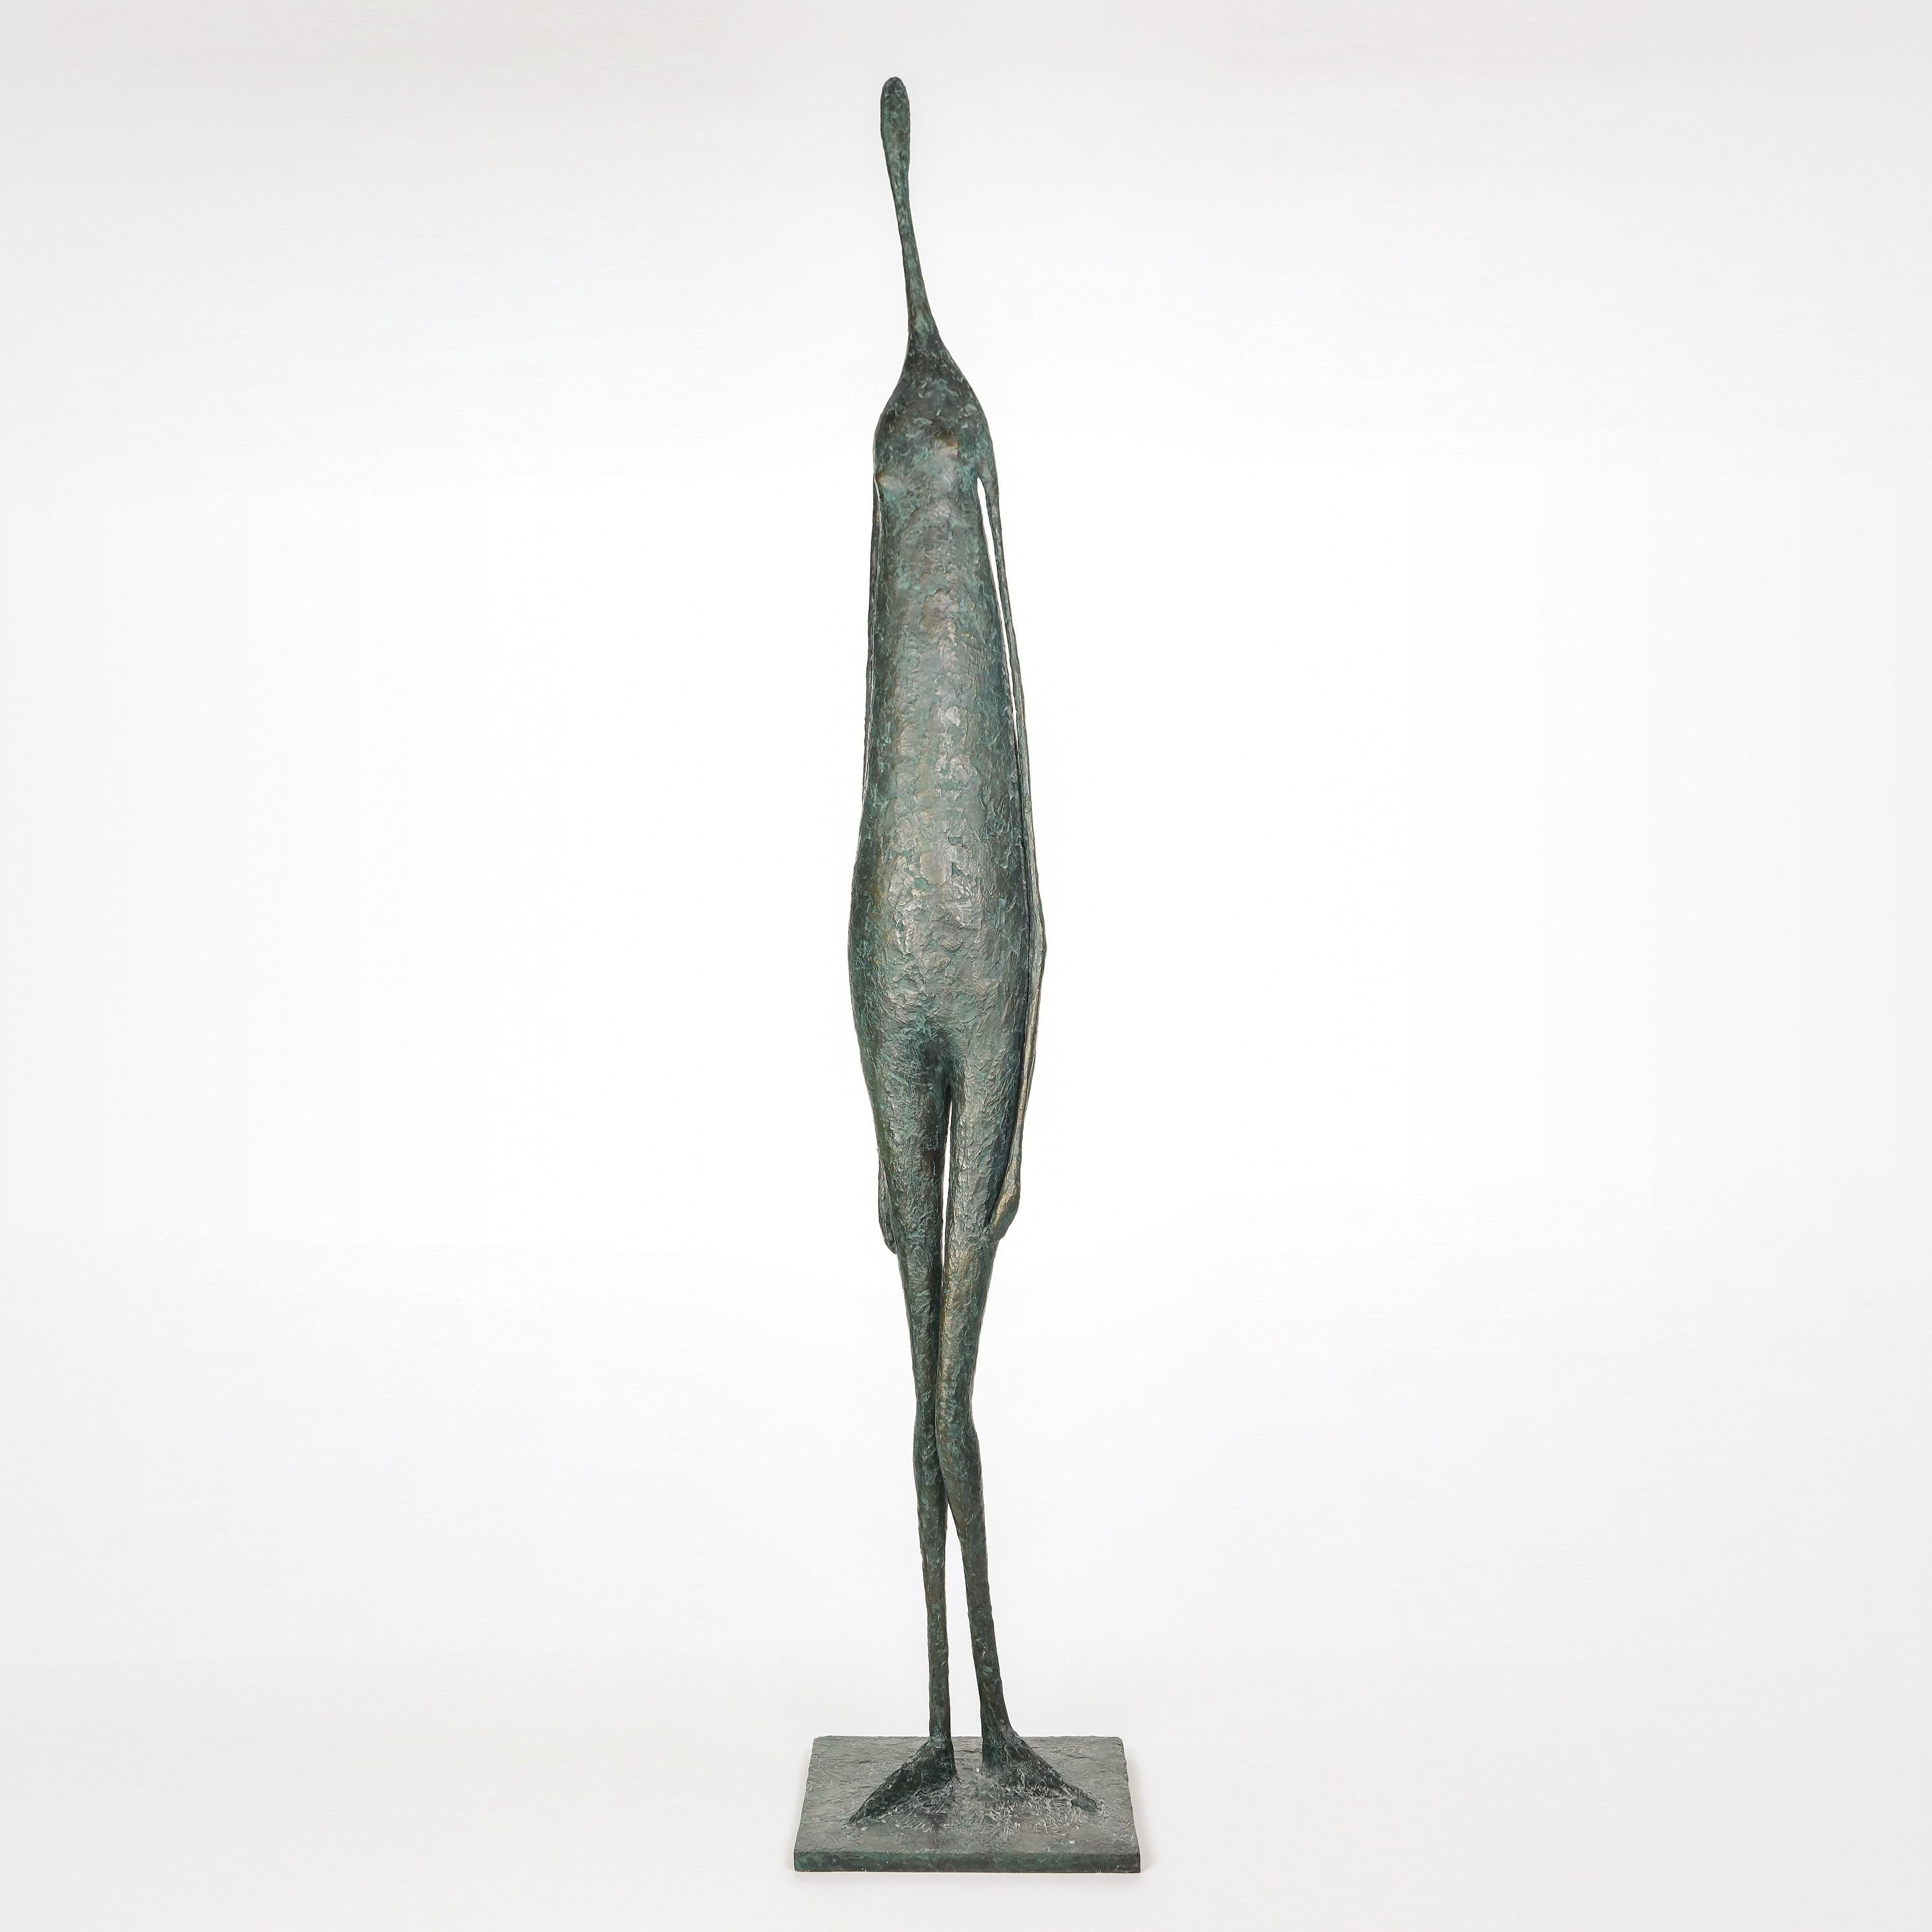 Large standing figure IV is a bronze sculpture by French contemporary artist Pierre Yermia, dimensions are 147 × 28 × 26 cm (57.9 × 11 × 10.2 in). 
The sculpture is signed and numbered, it is part of a limited edition of 8 editions + 4 artist’s